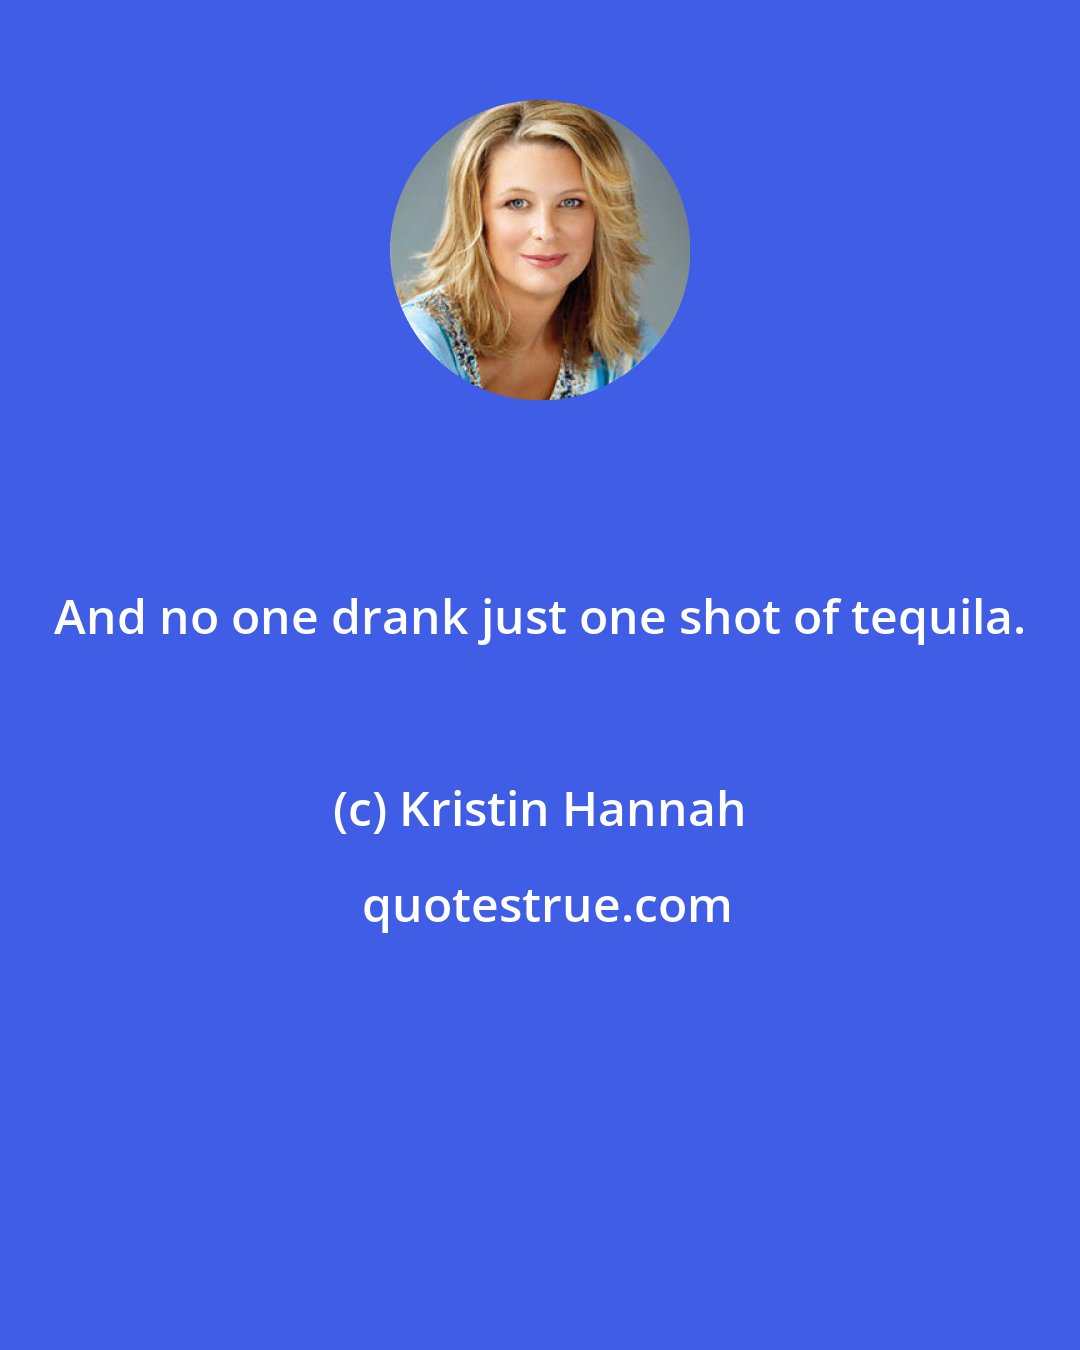 Kristin Hannah: And no one drank just one shot of tequila.